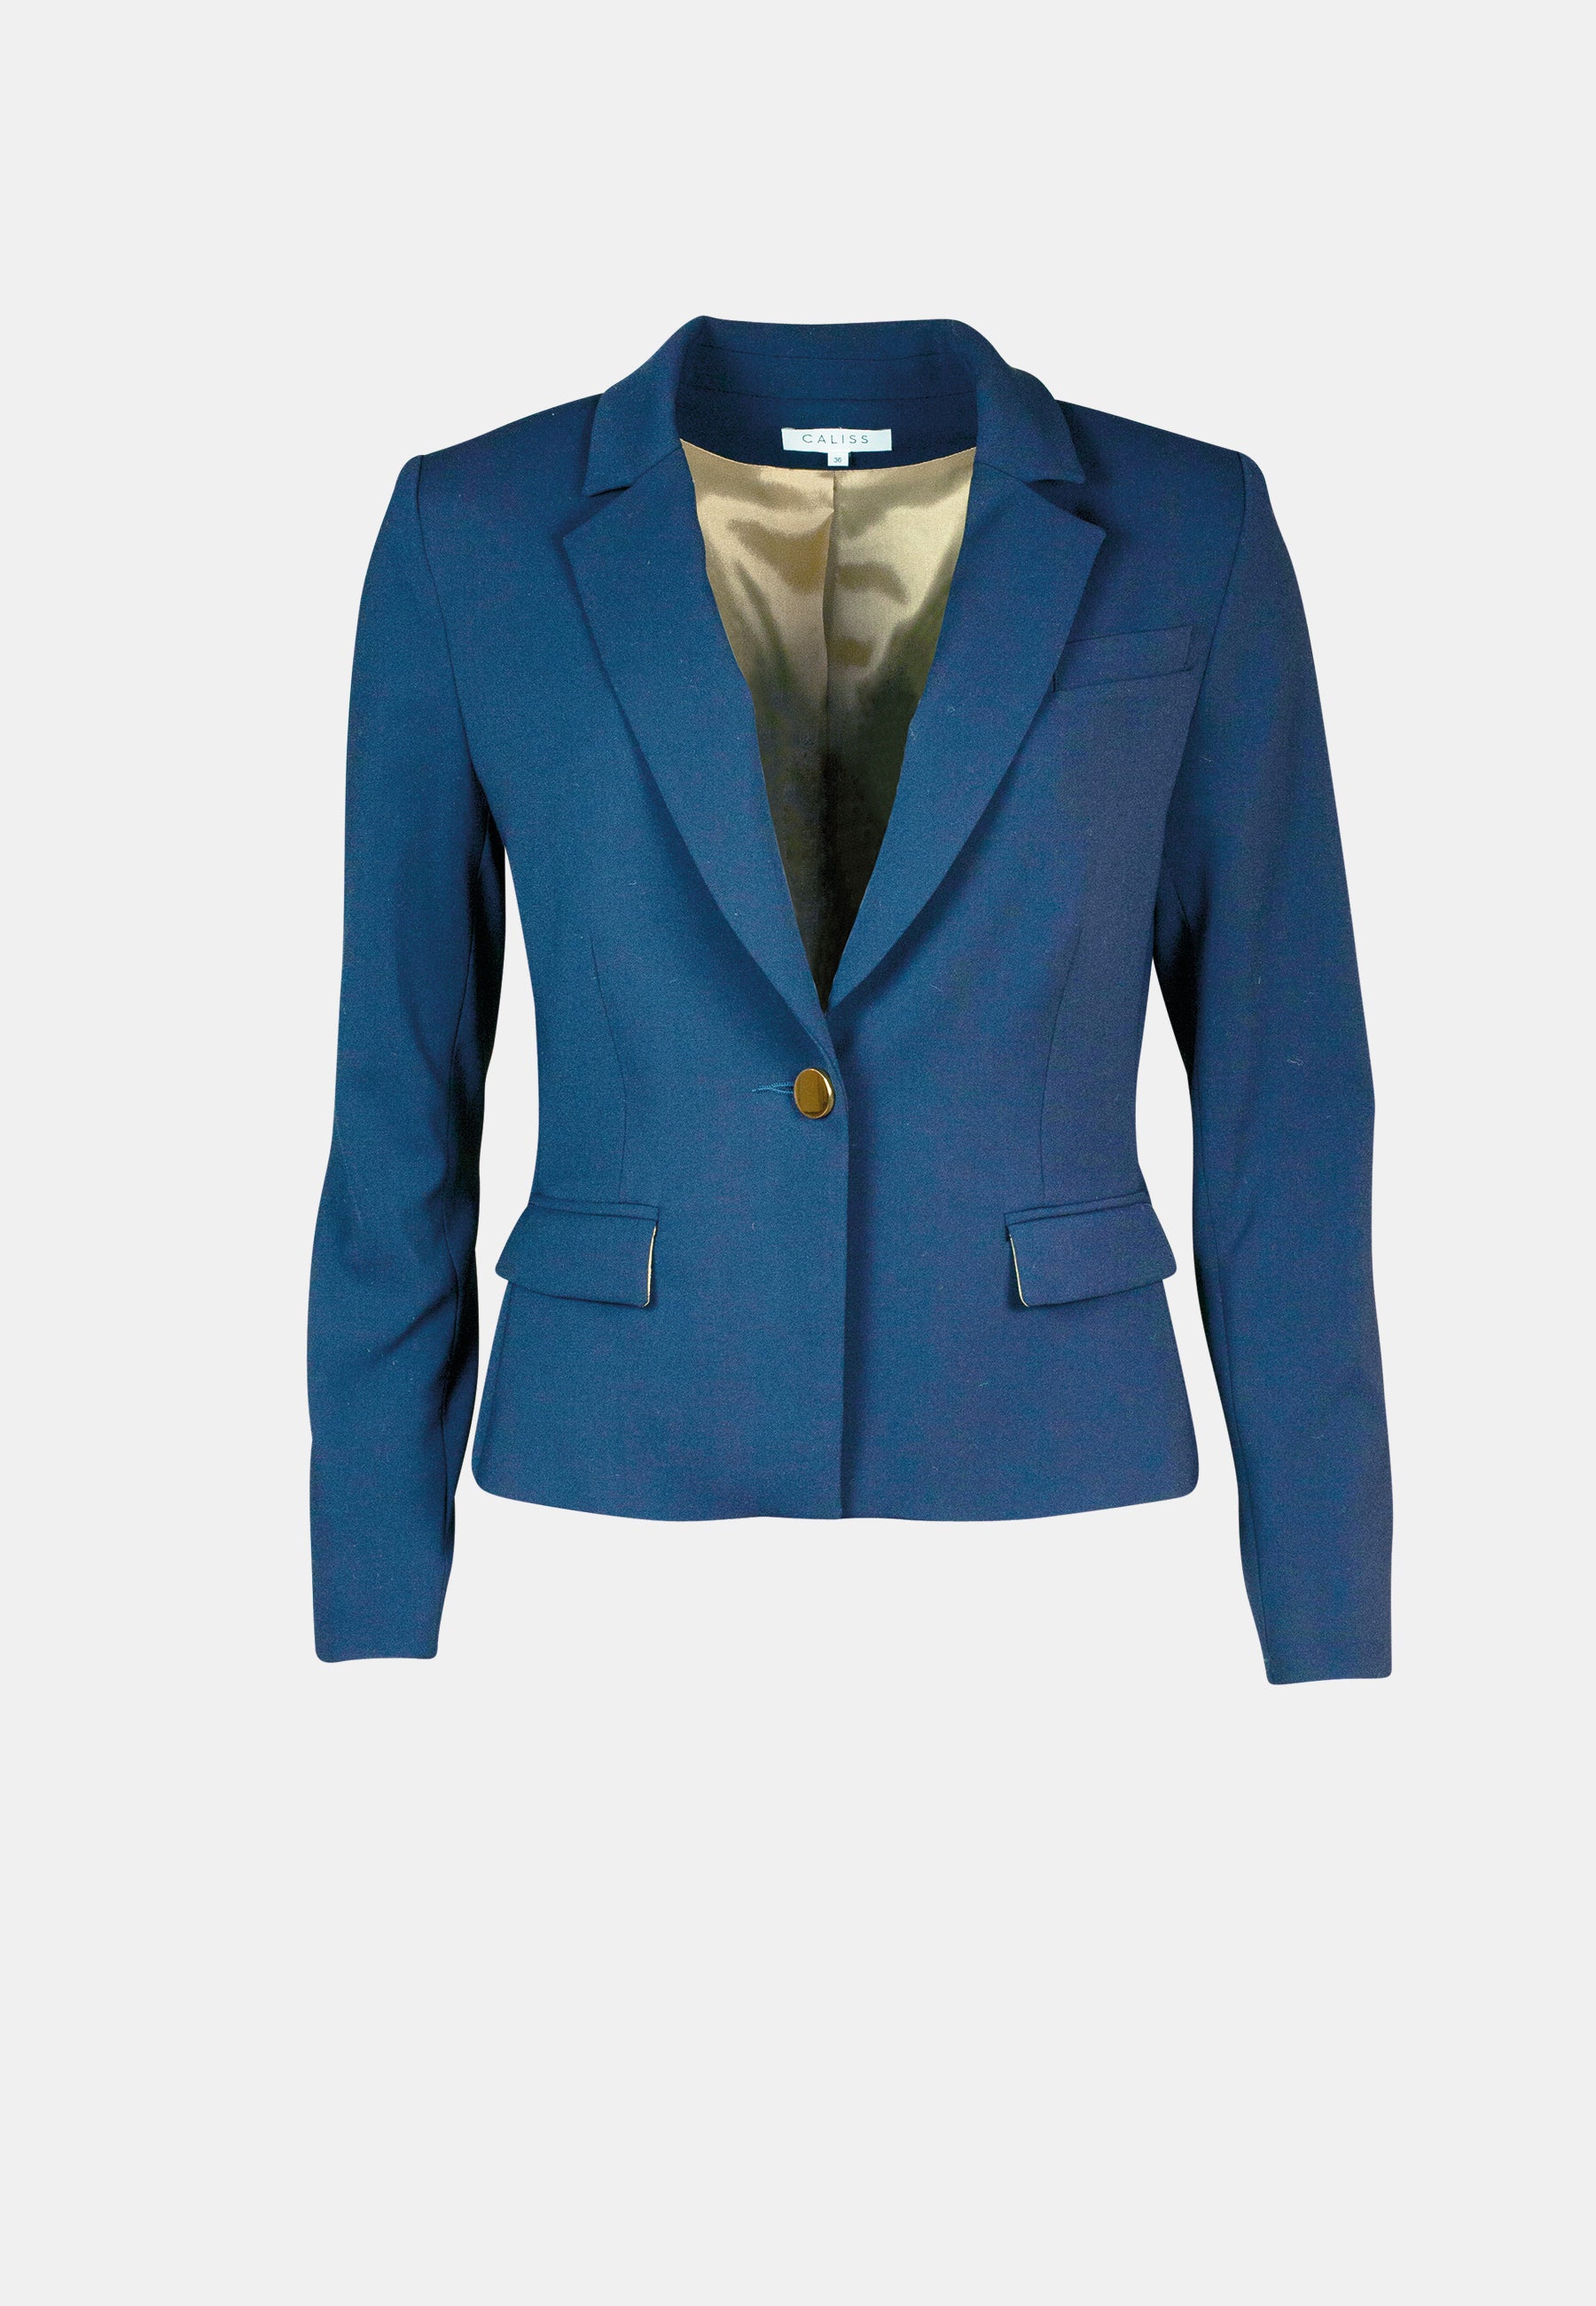 Blazer Molly in teal